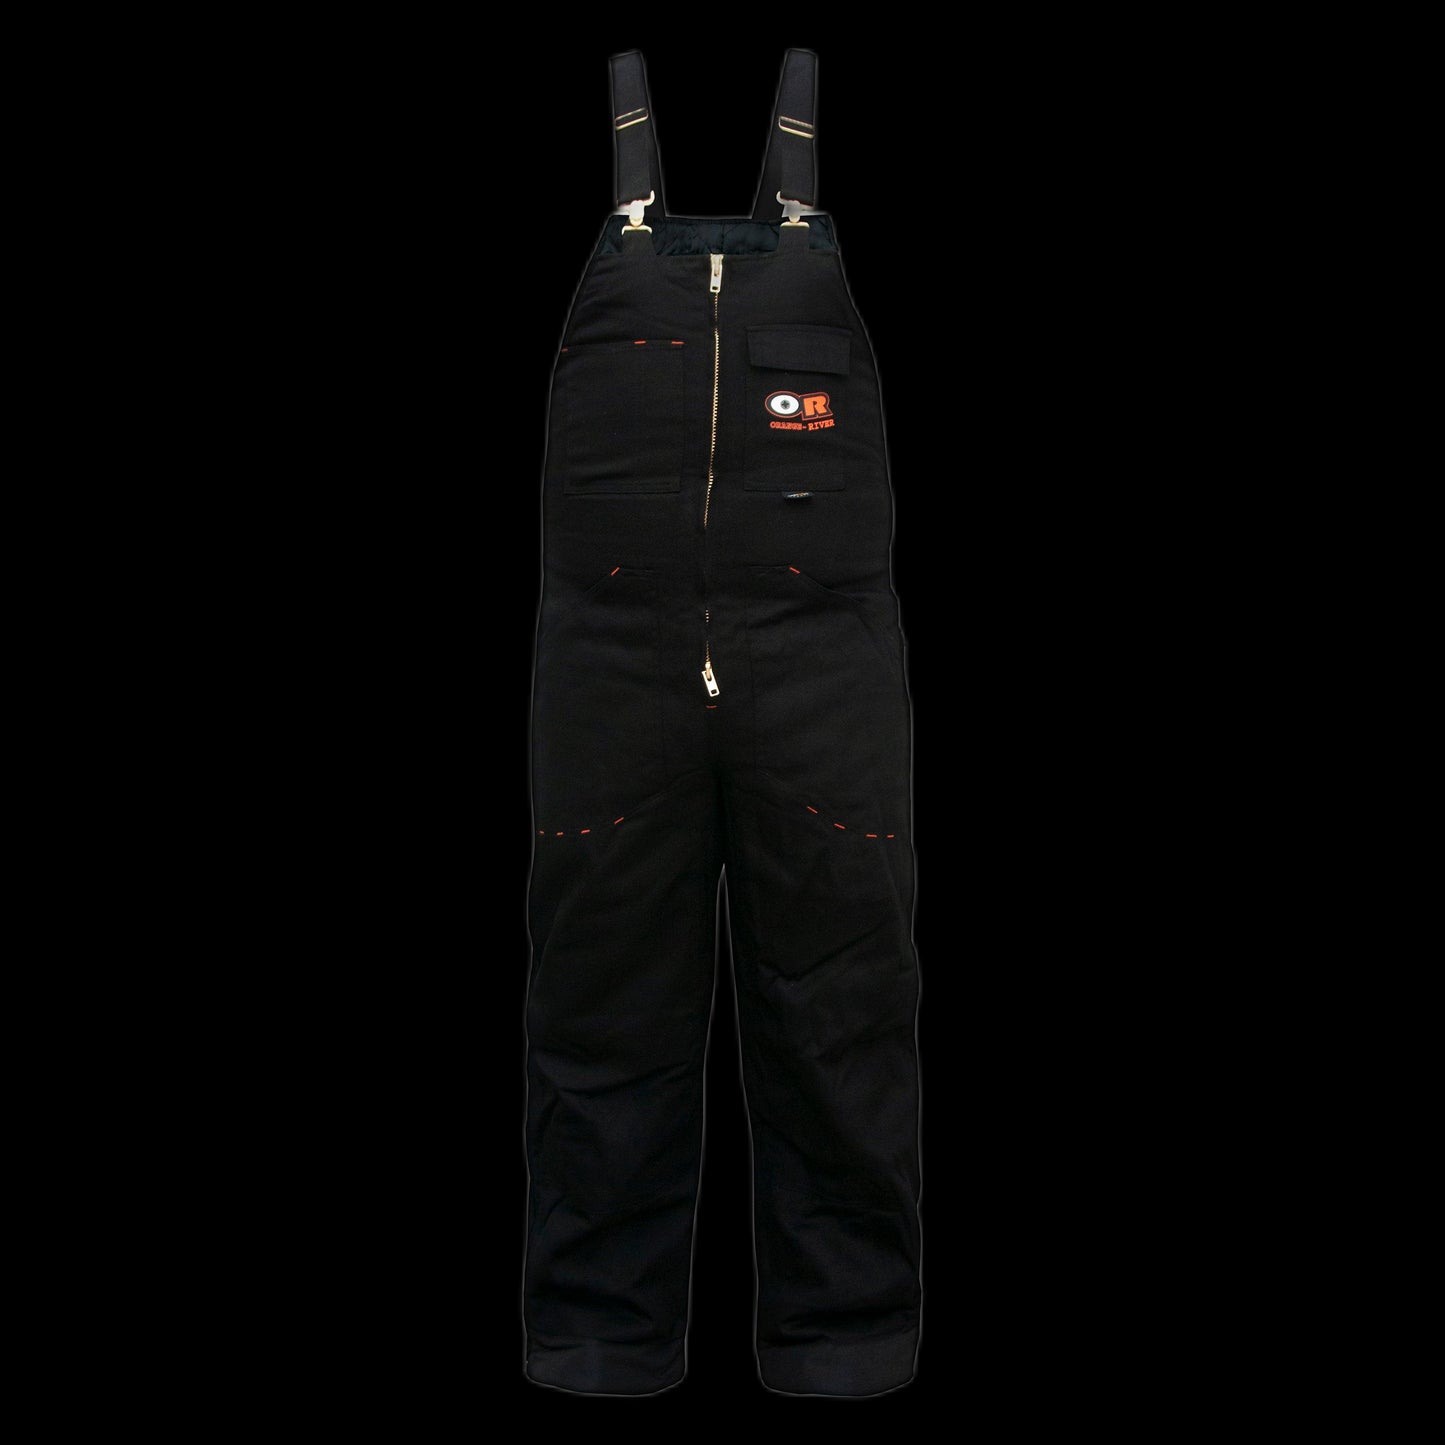 Men's Stain and Oil Resistant Winter Overalls, Style: FLEECE